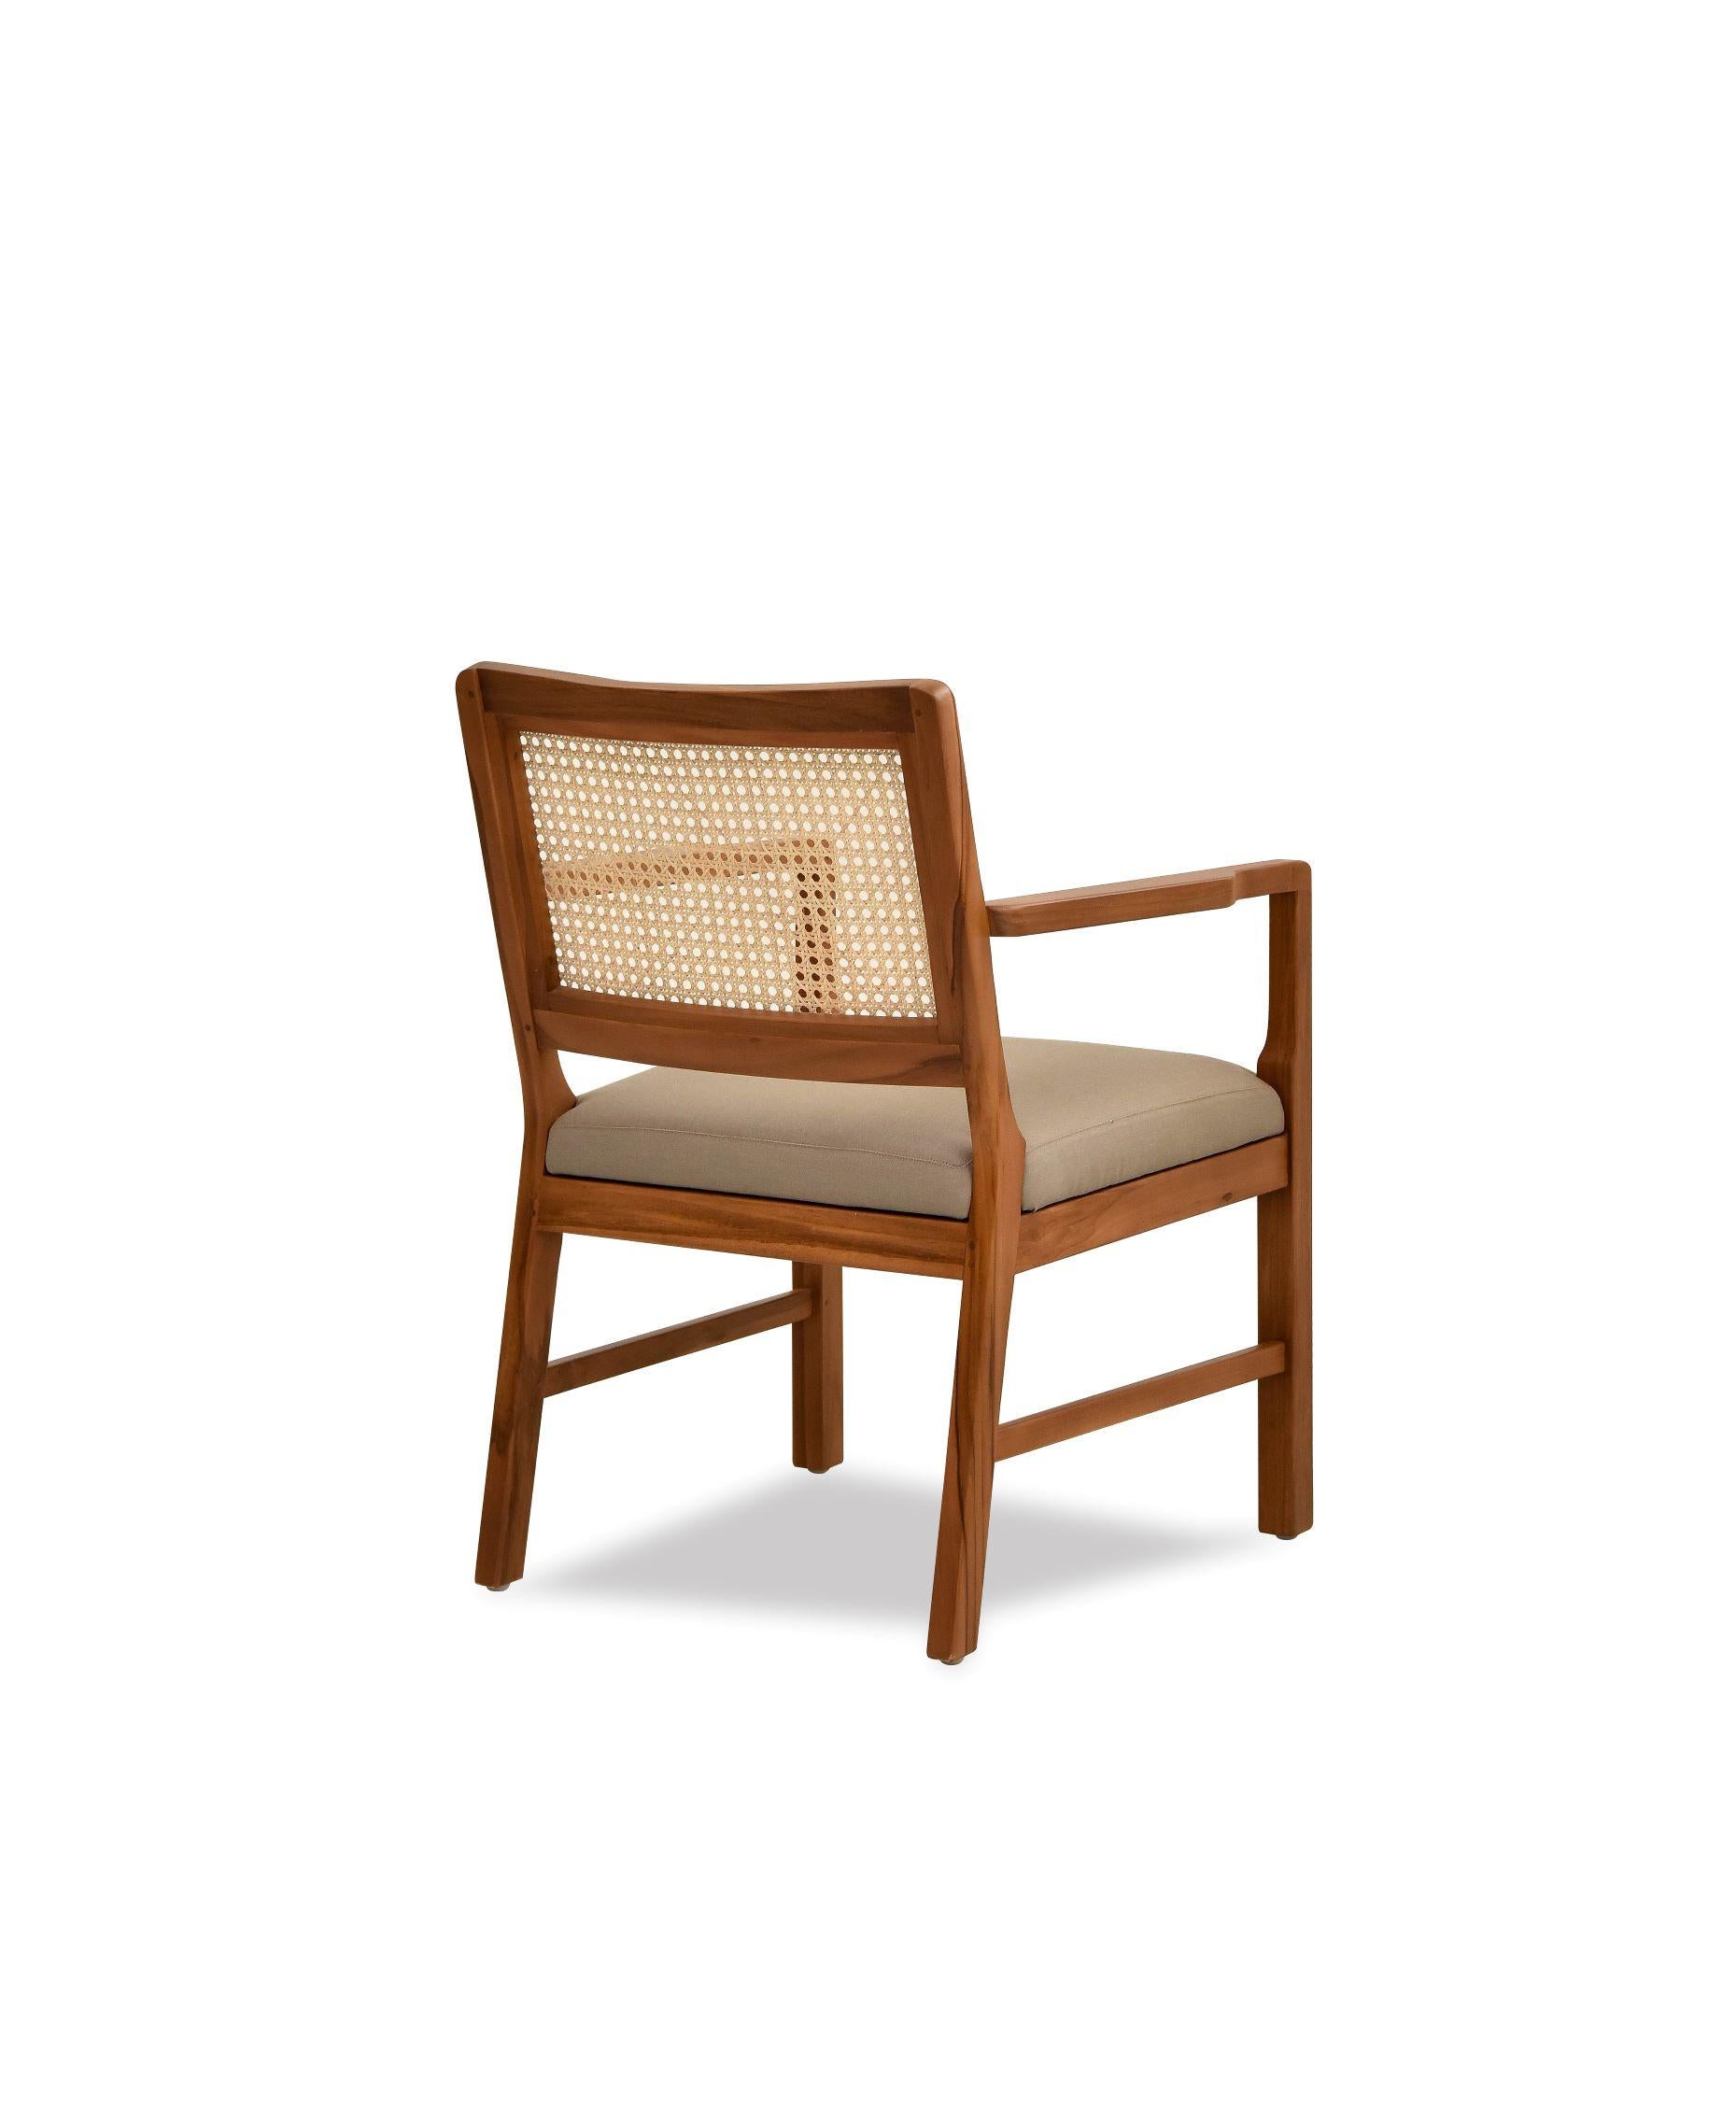 Contemporary Teak Armchair with Woven Cane Back For Sale